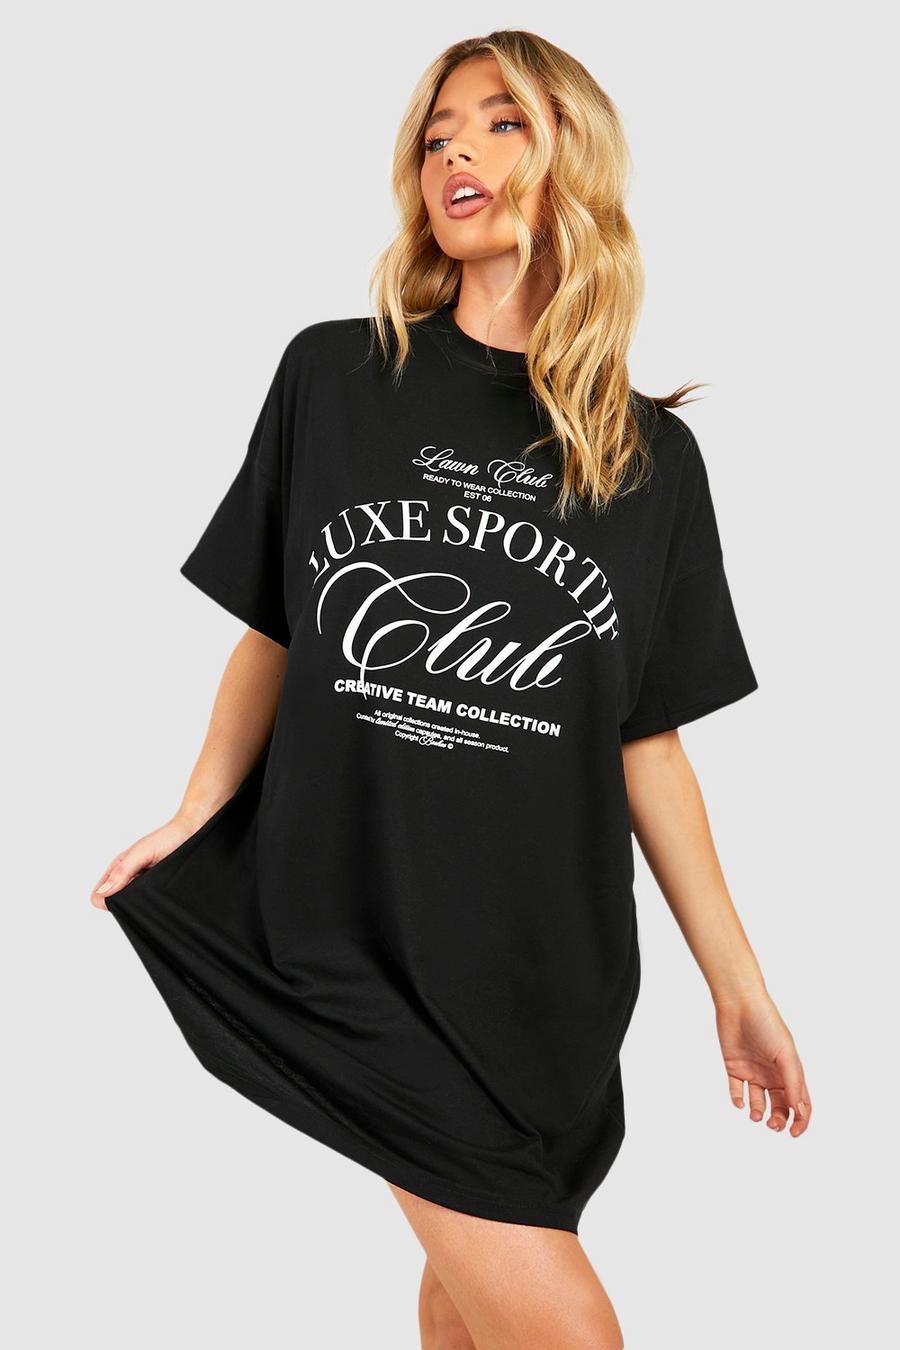 Robe t-shirt oversize Luxe Sport Club, Black image number 1